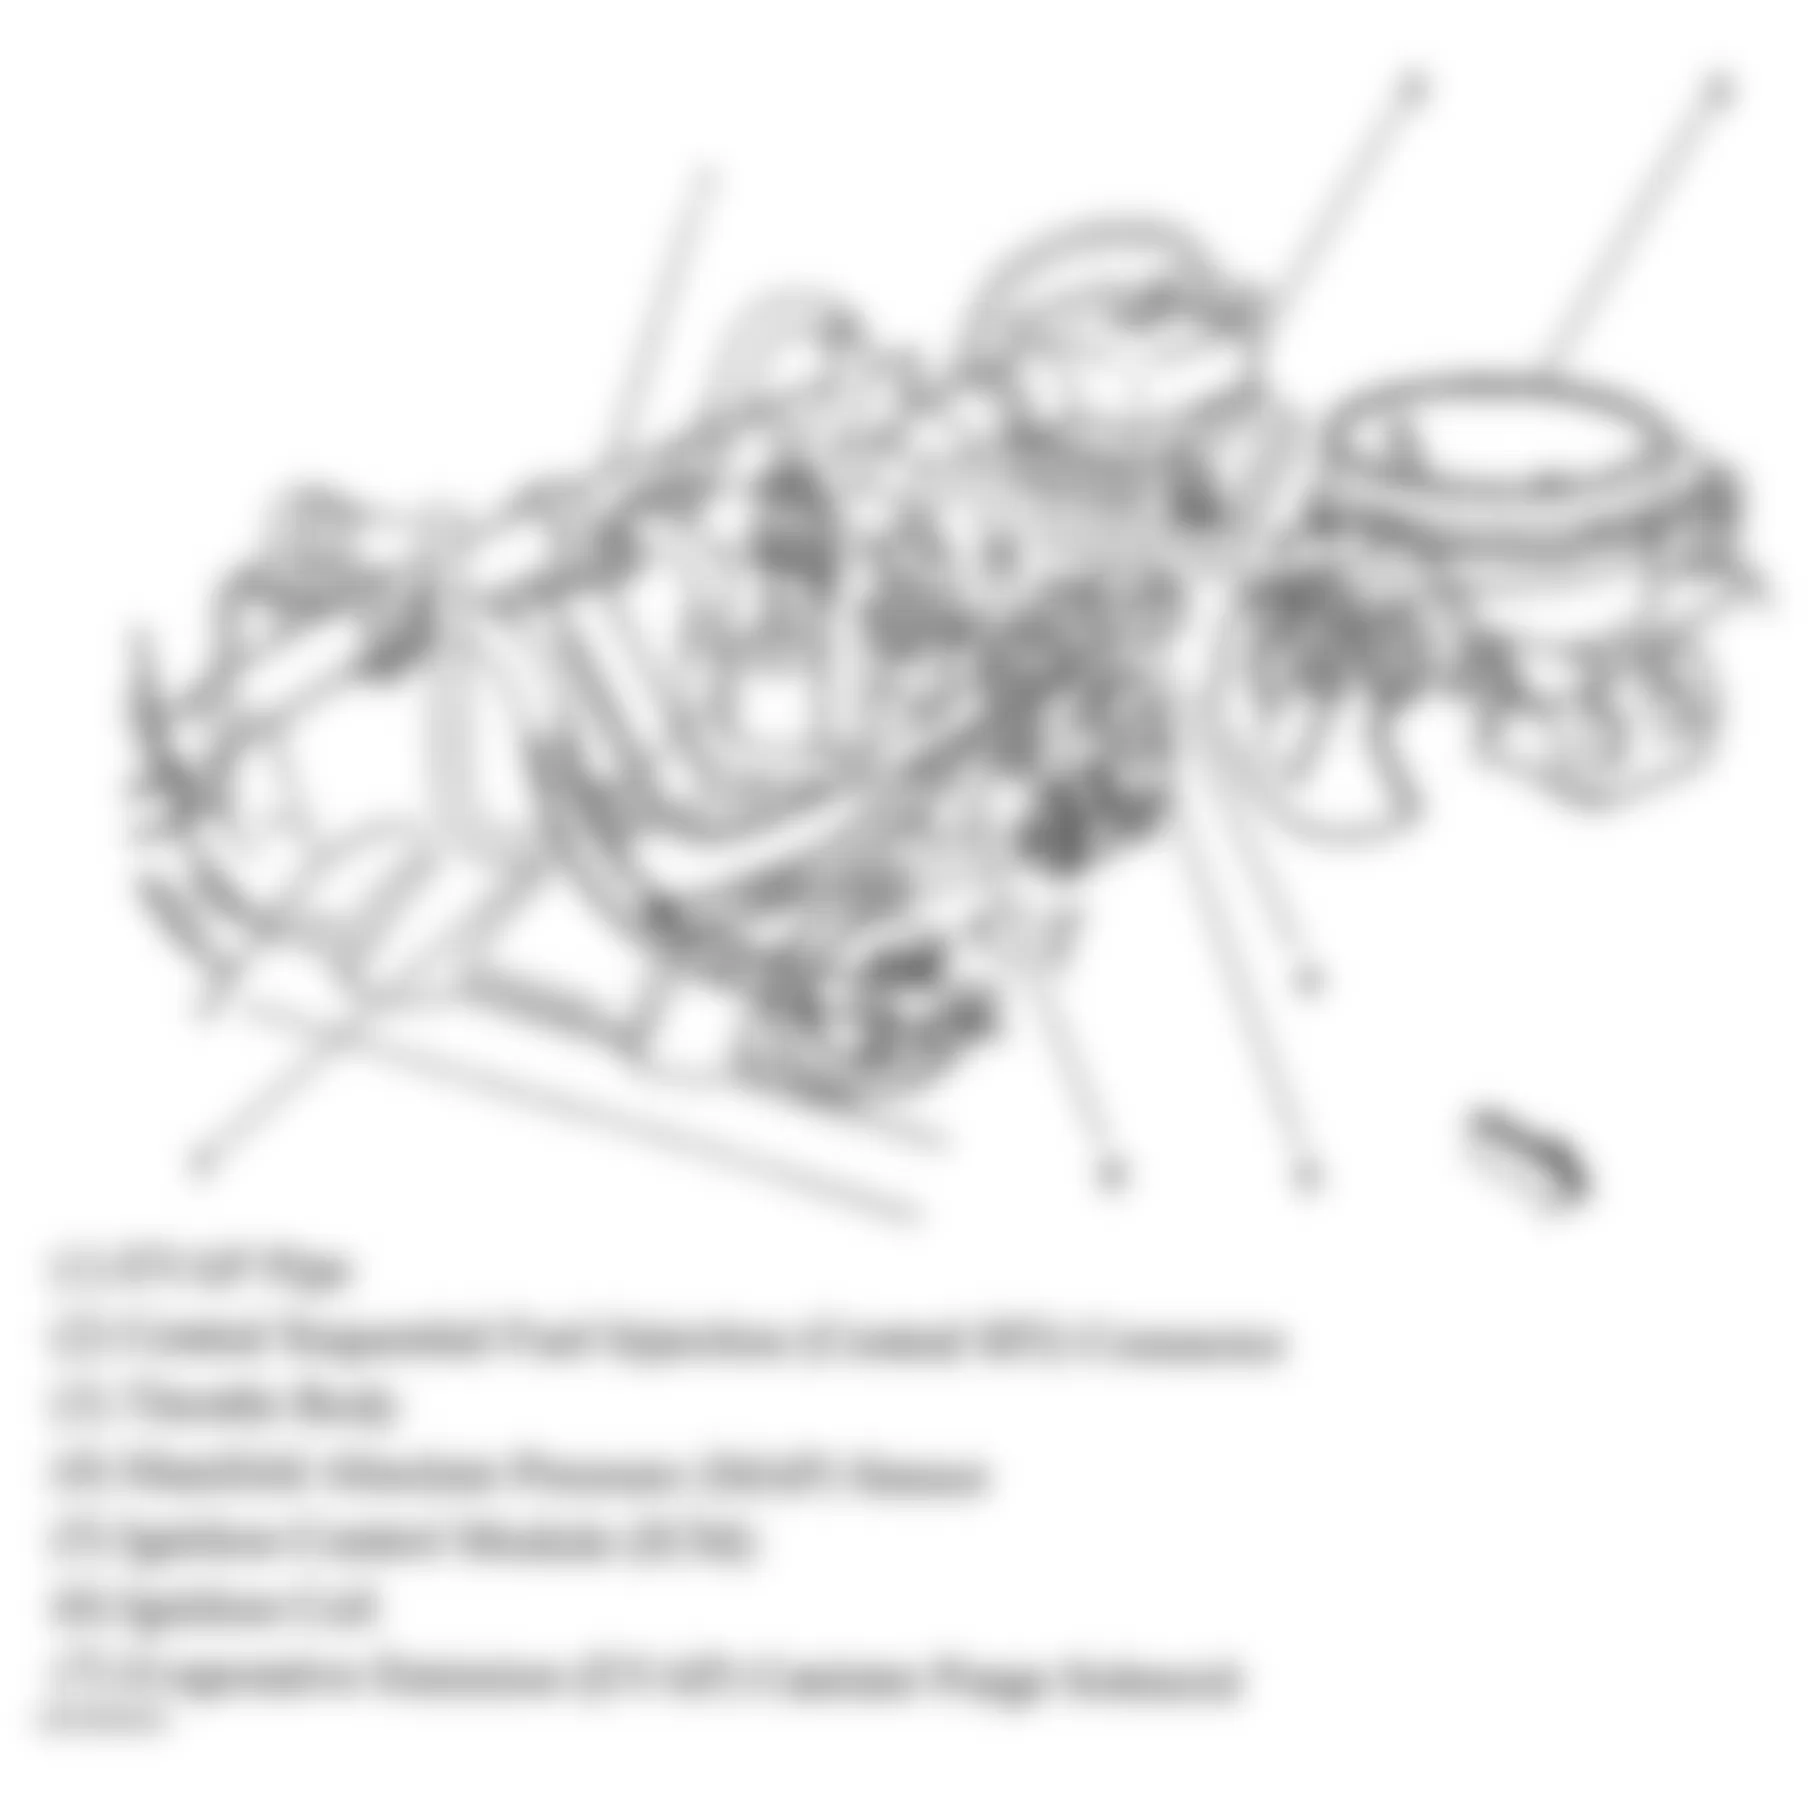 GMC Sonoma 2004 - Component Locations -  Top Of Engine